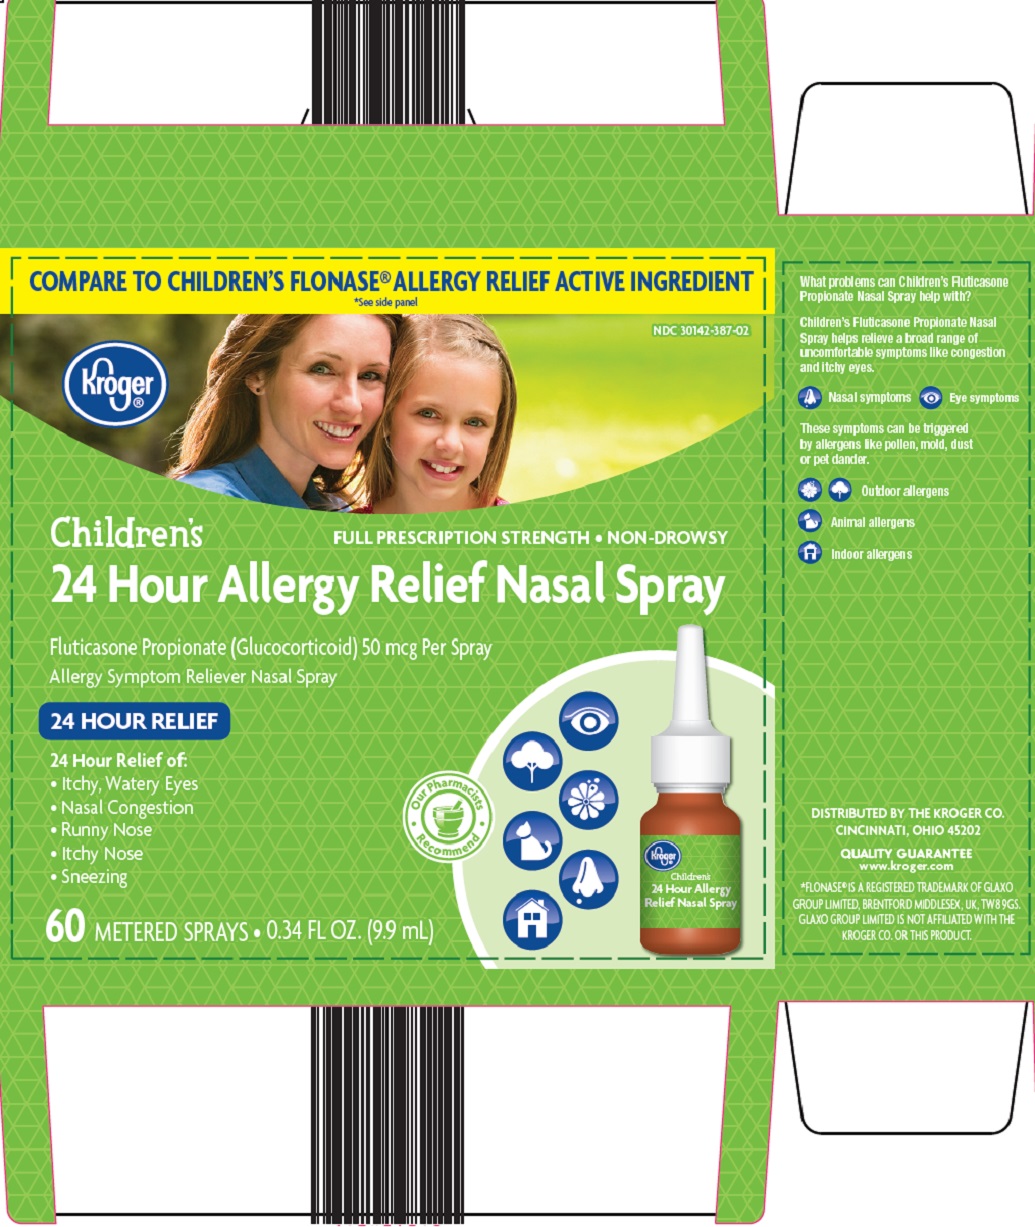 childrens 24 hour allergy relief nasal spray image 1